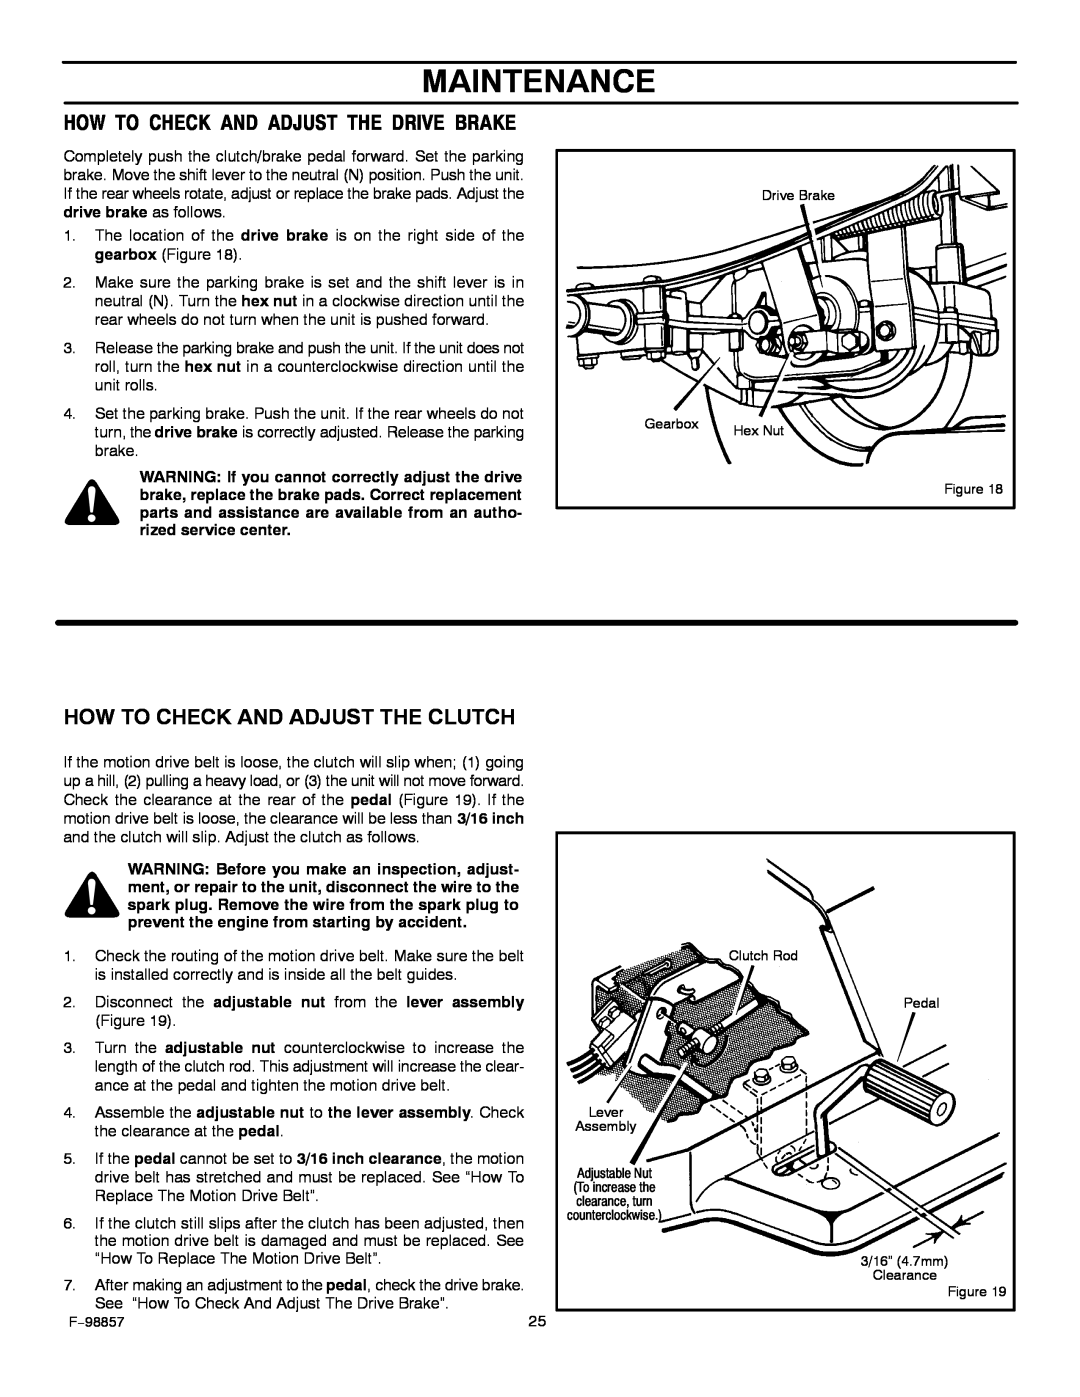 Hayter Mowers 30-Dec manual How To Check And Adjust The Drive Brake, How To Check And Adjust The Clutch, Maintenance 